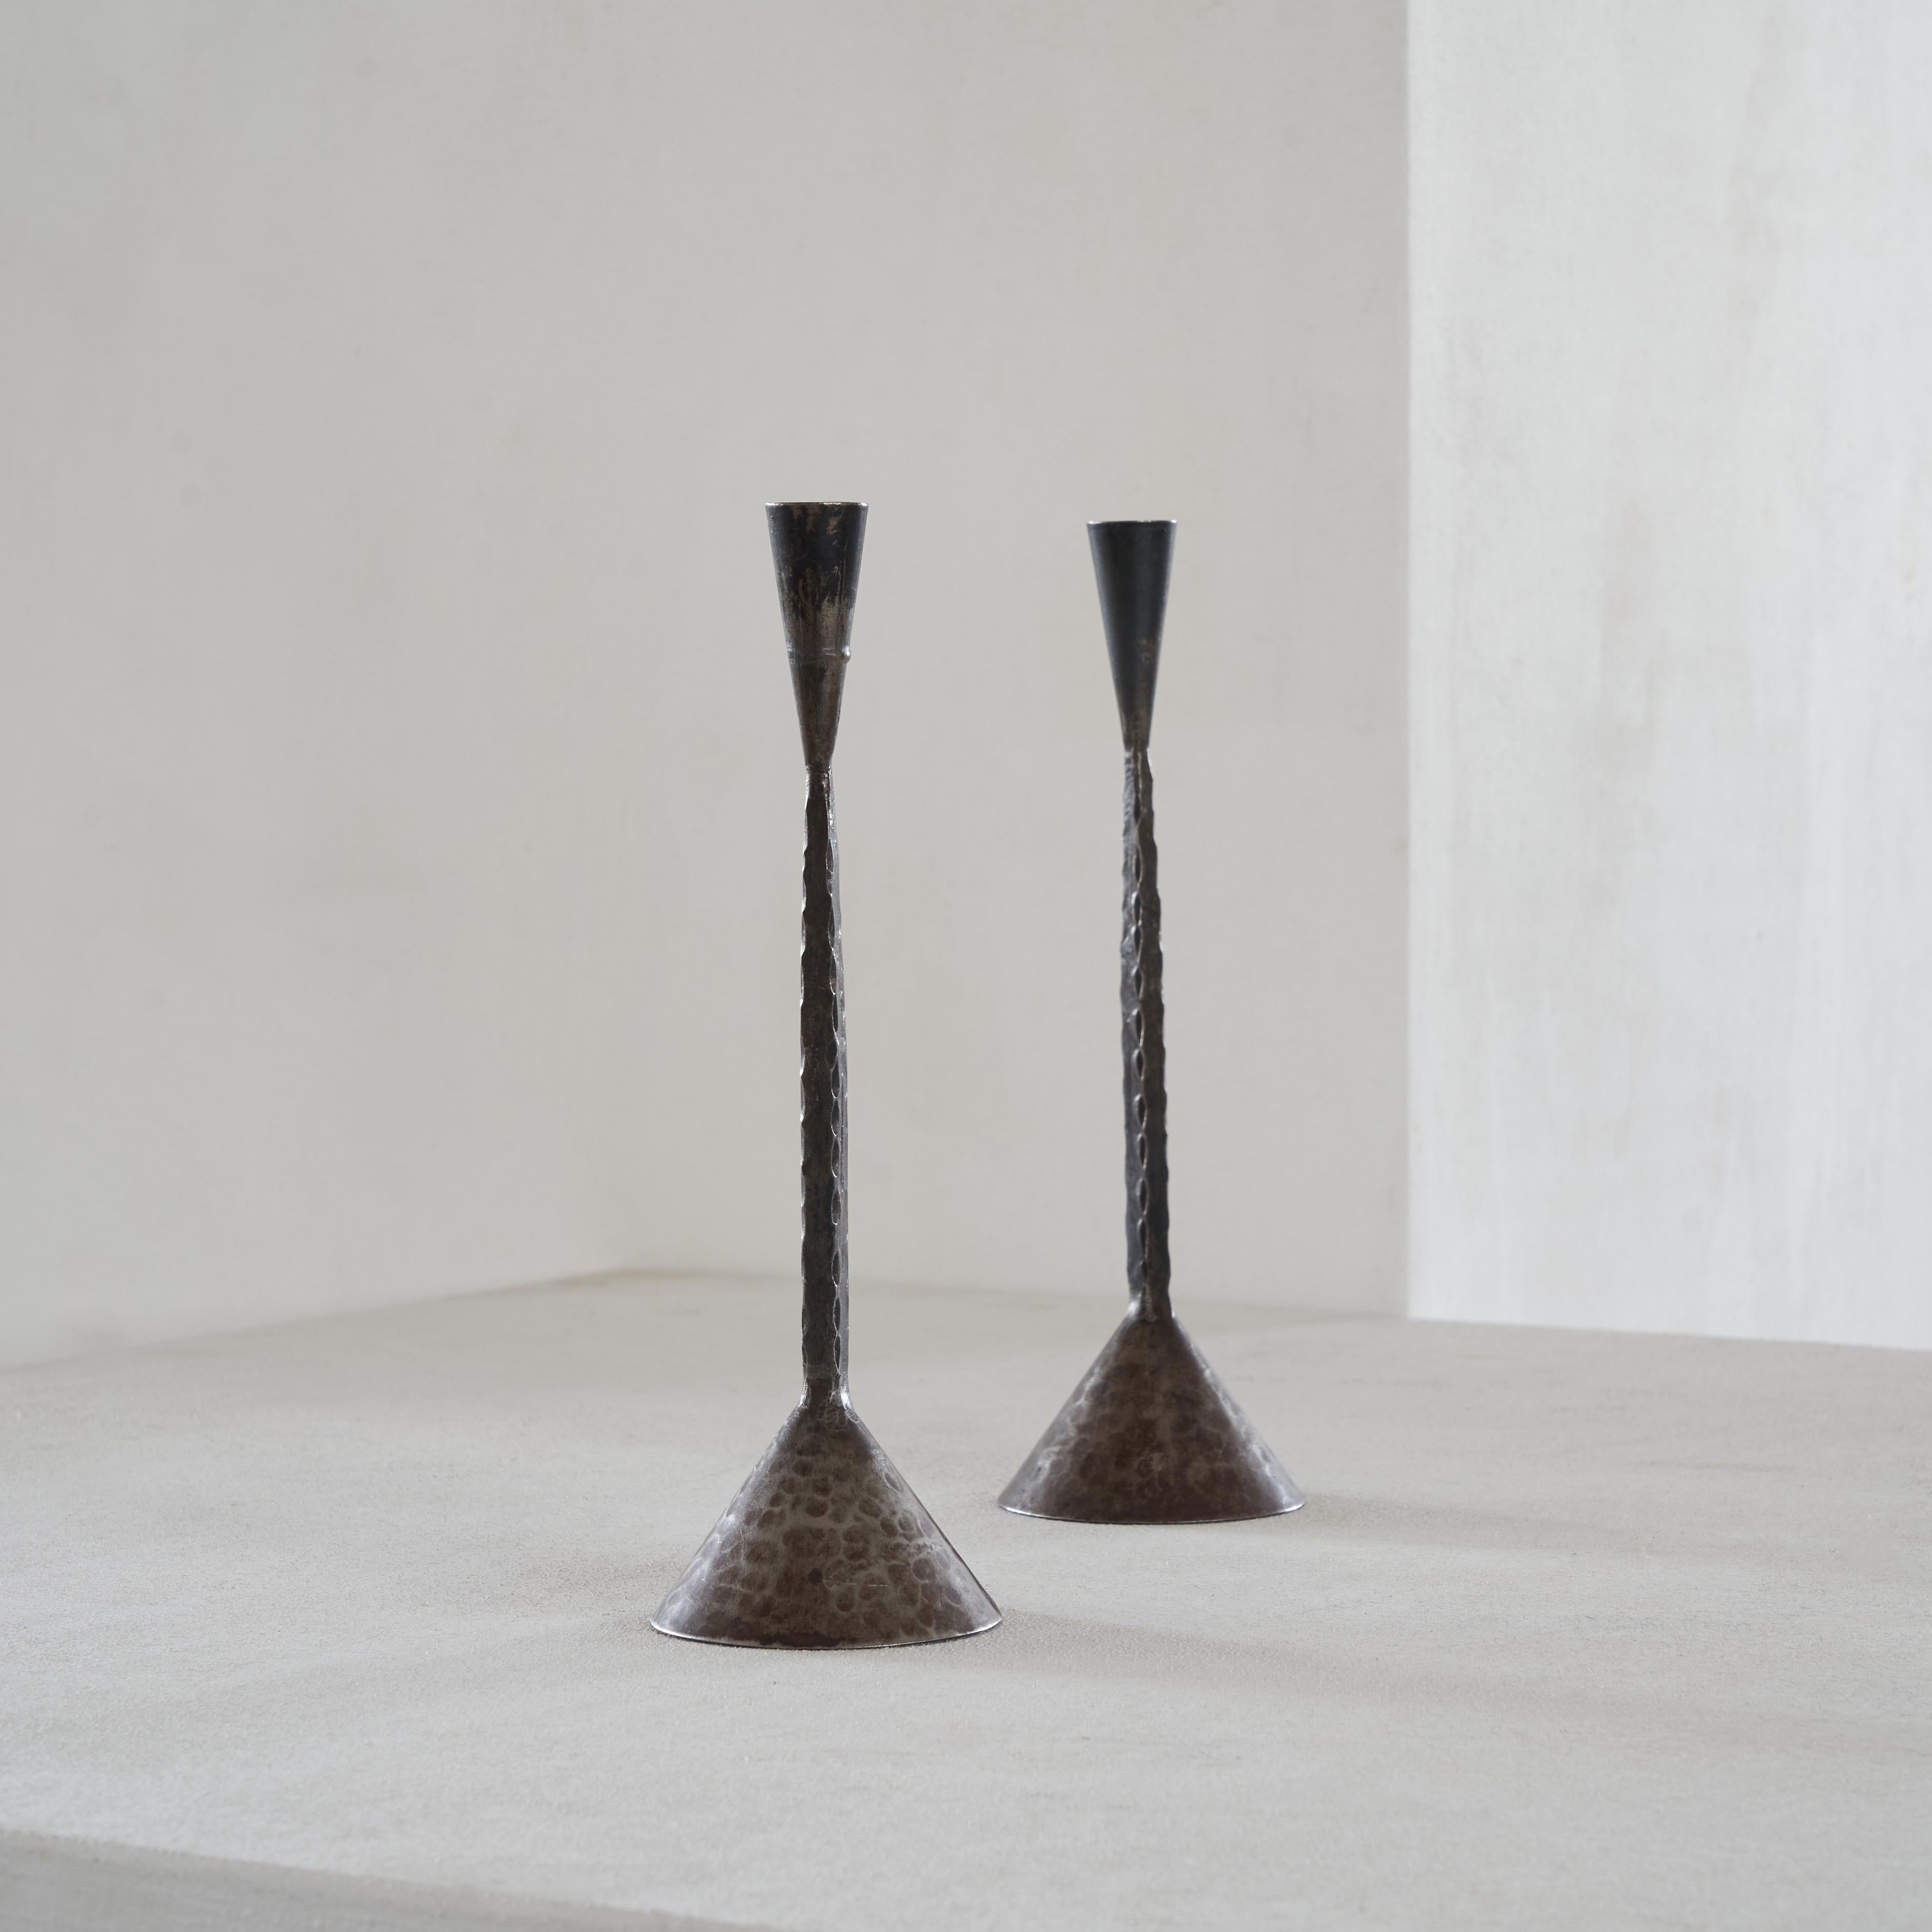 Pair of hand hammered mid-century brutalist candlesticks made in Sweden. 

Very elegant and simple pair of candlesticks with perfect proportions and great details. Hand made in Sweden somewhere in the middle of the last century. 

Good vintage